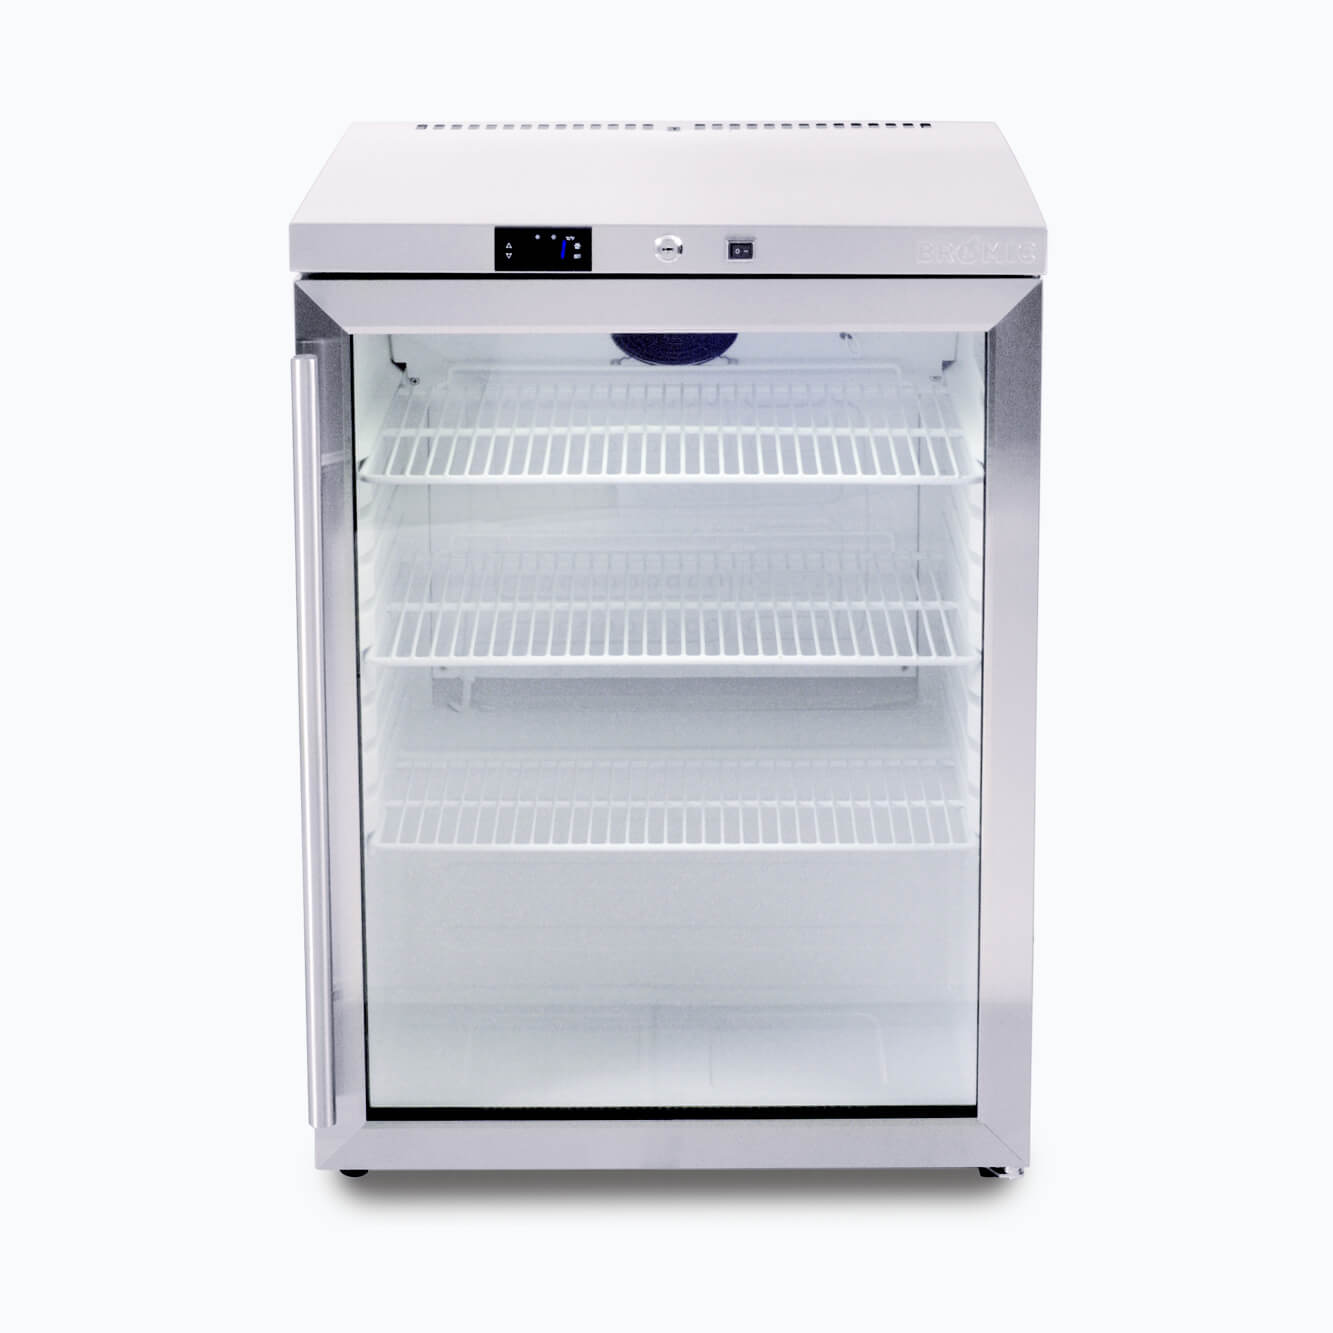 Image of a 138L stainless steel under bench display fridge with one hinged door, front view.